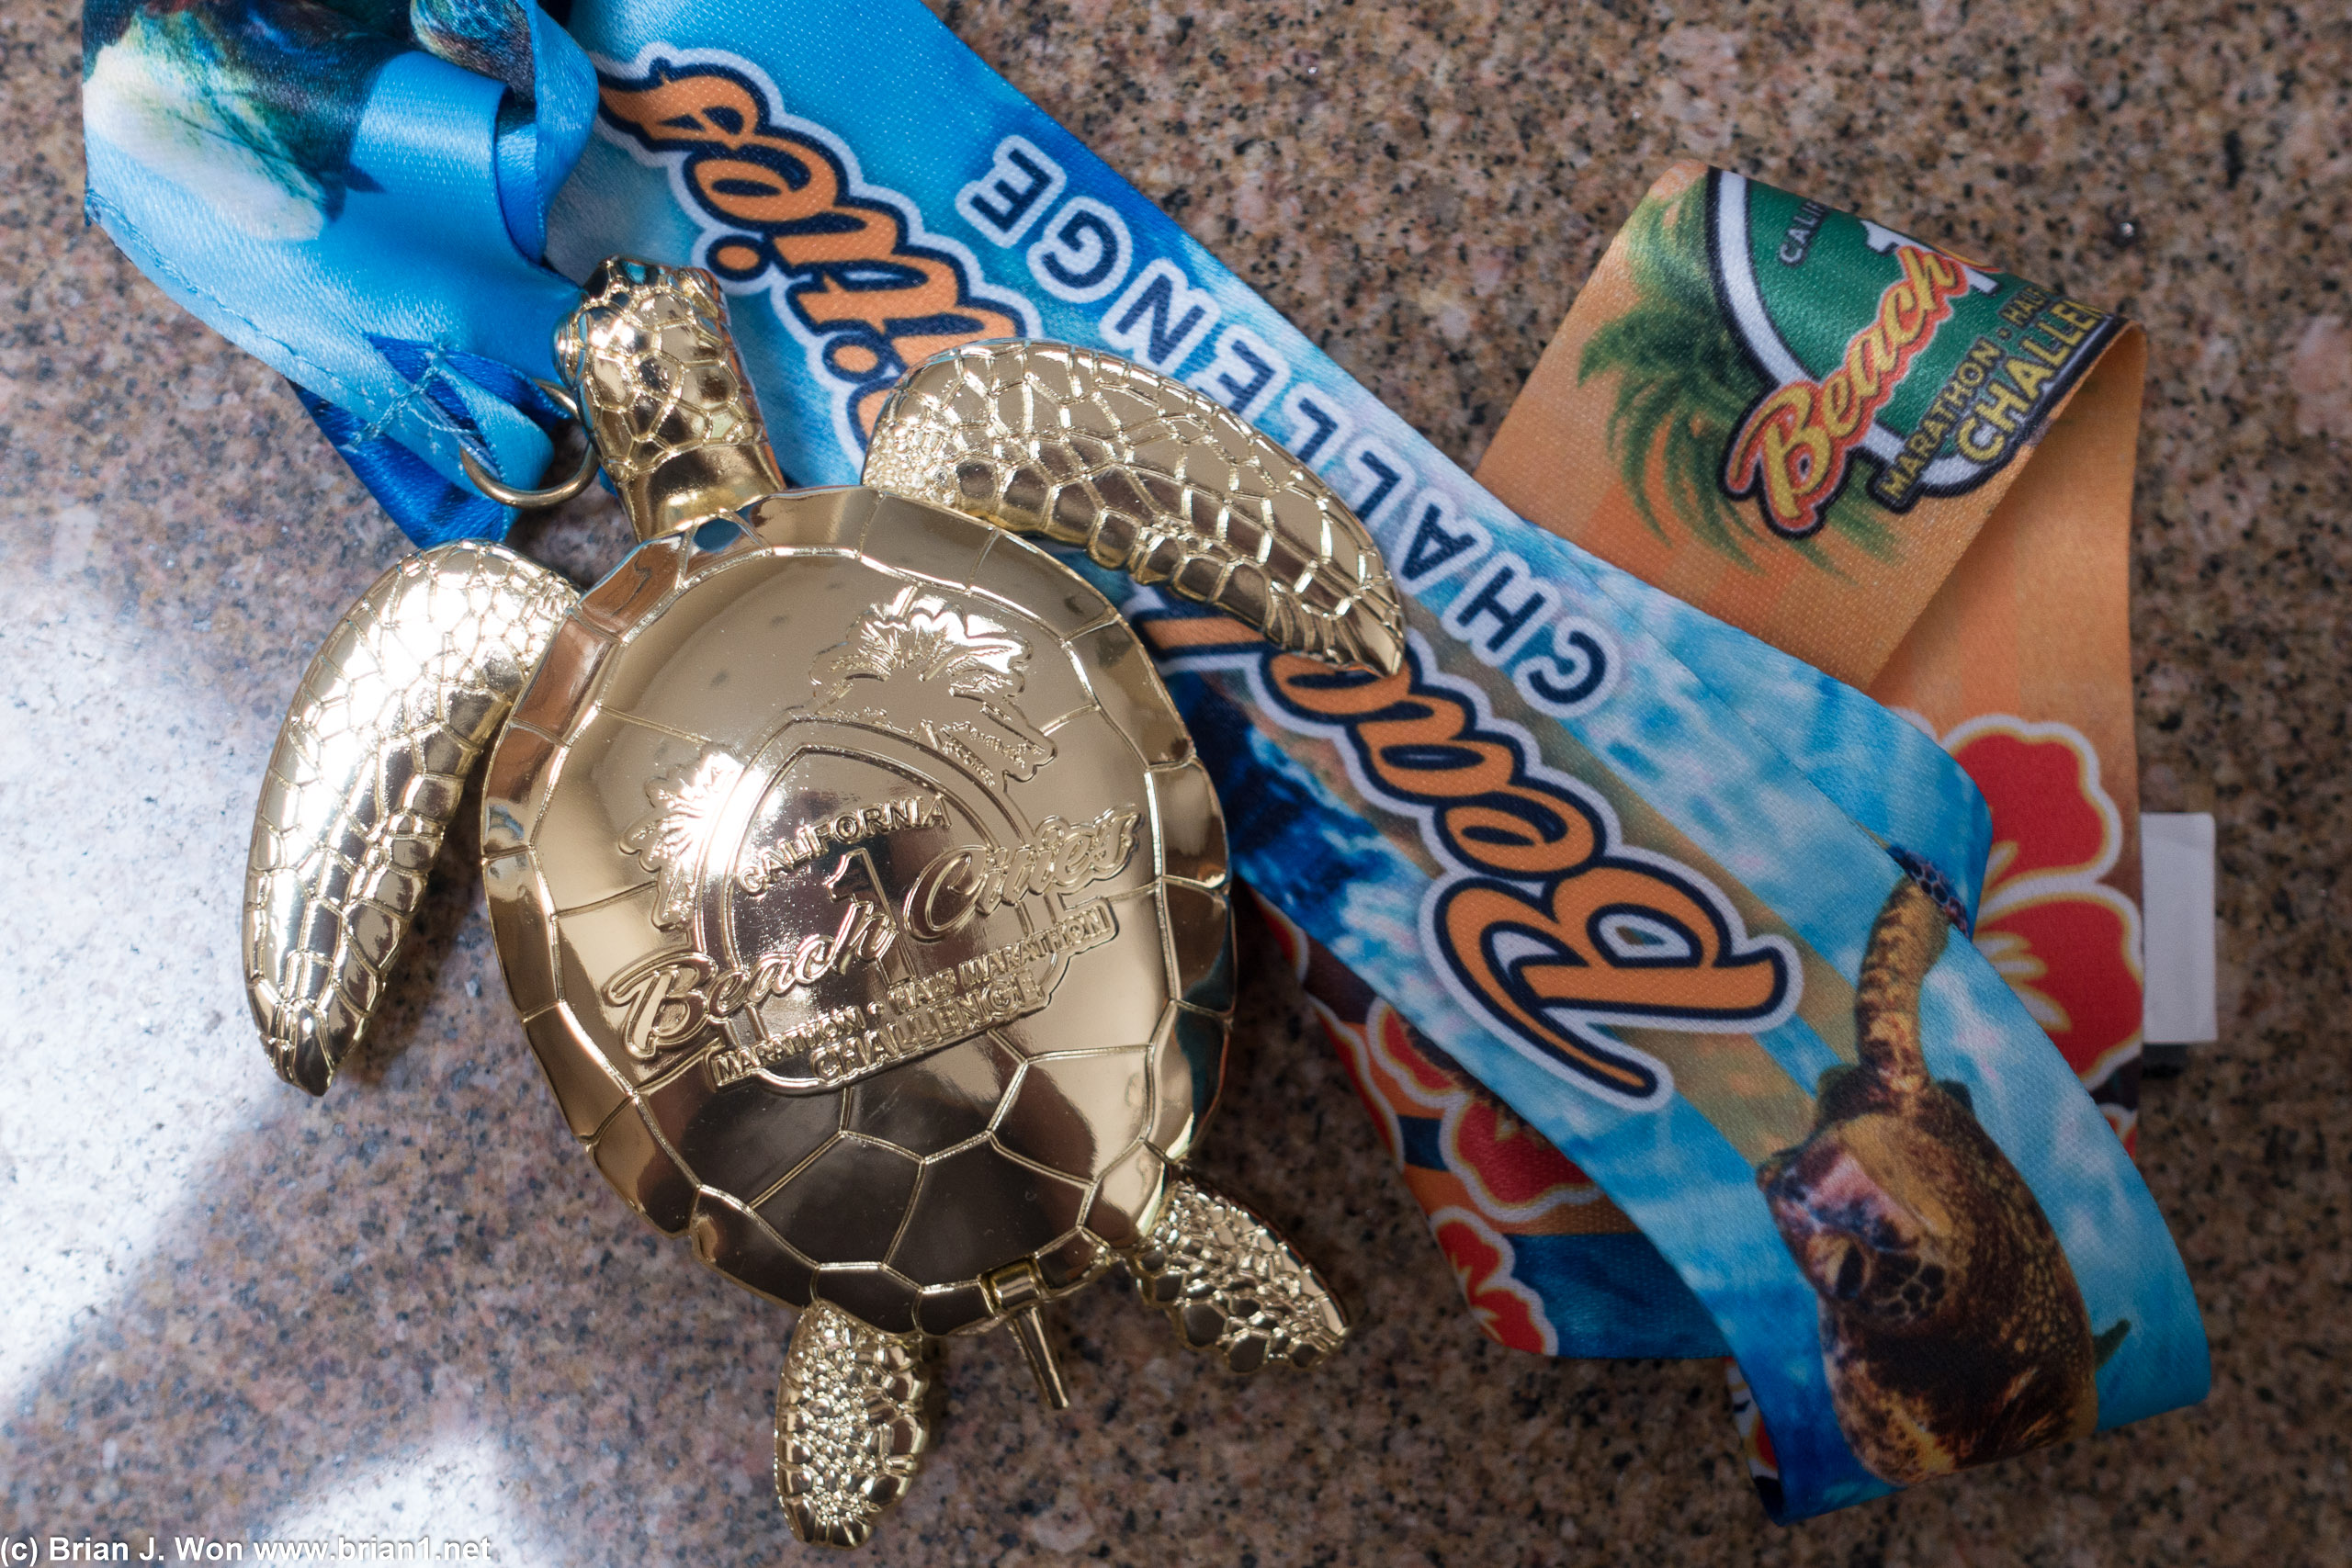 This year's Beach Cities Challenge medal.